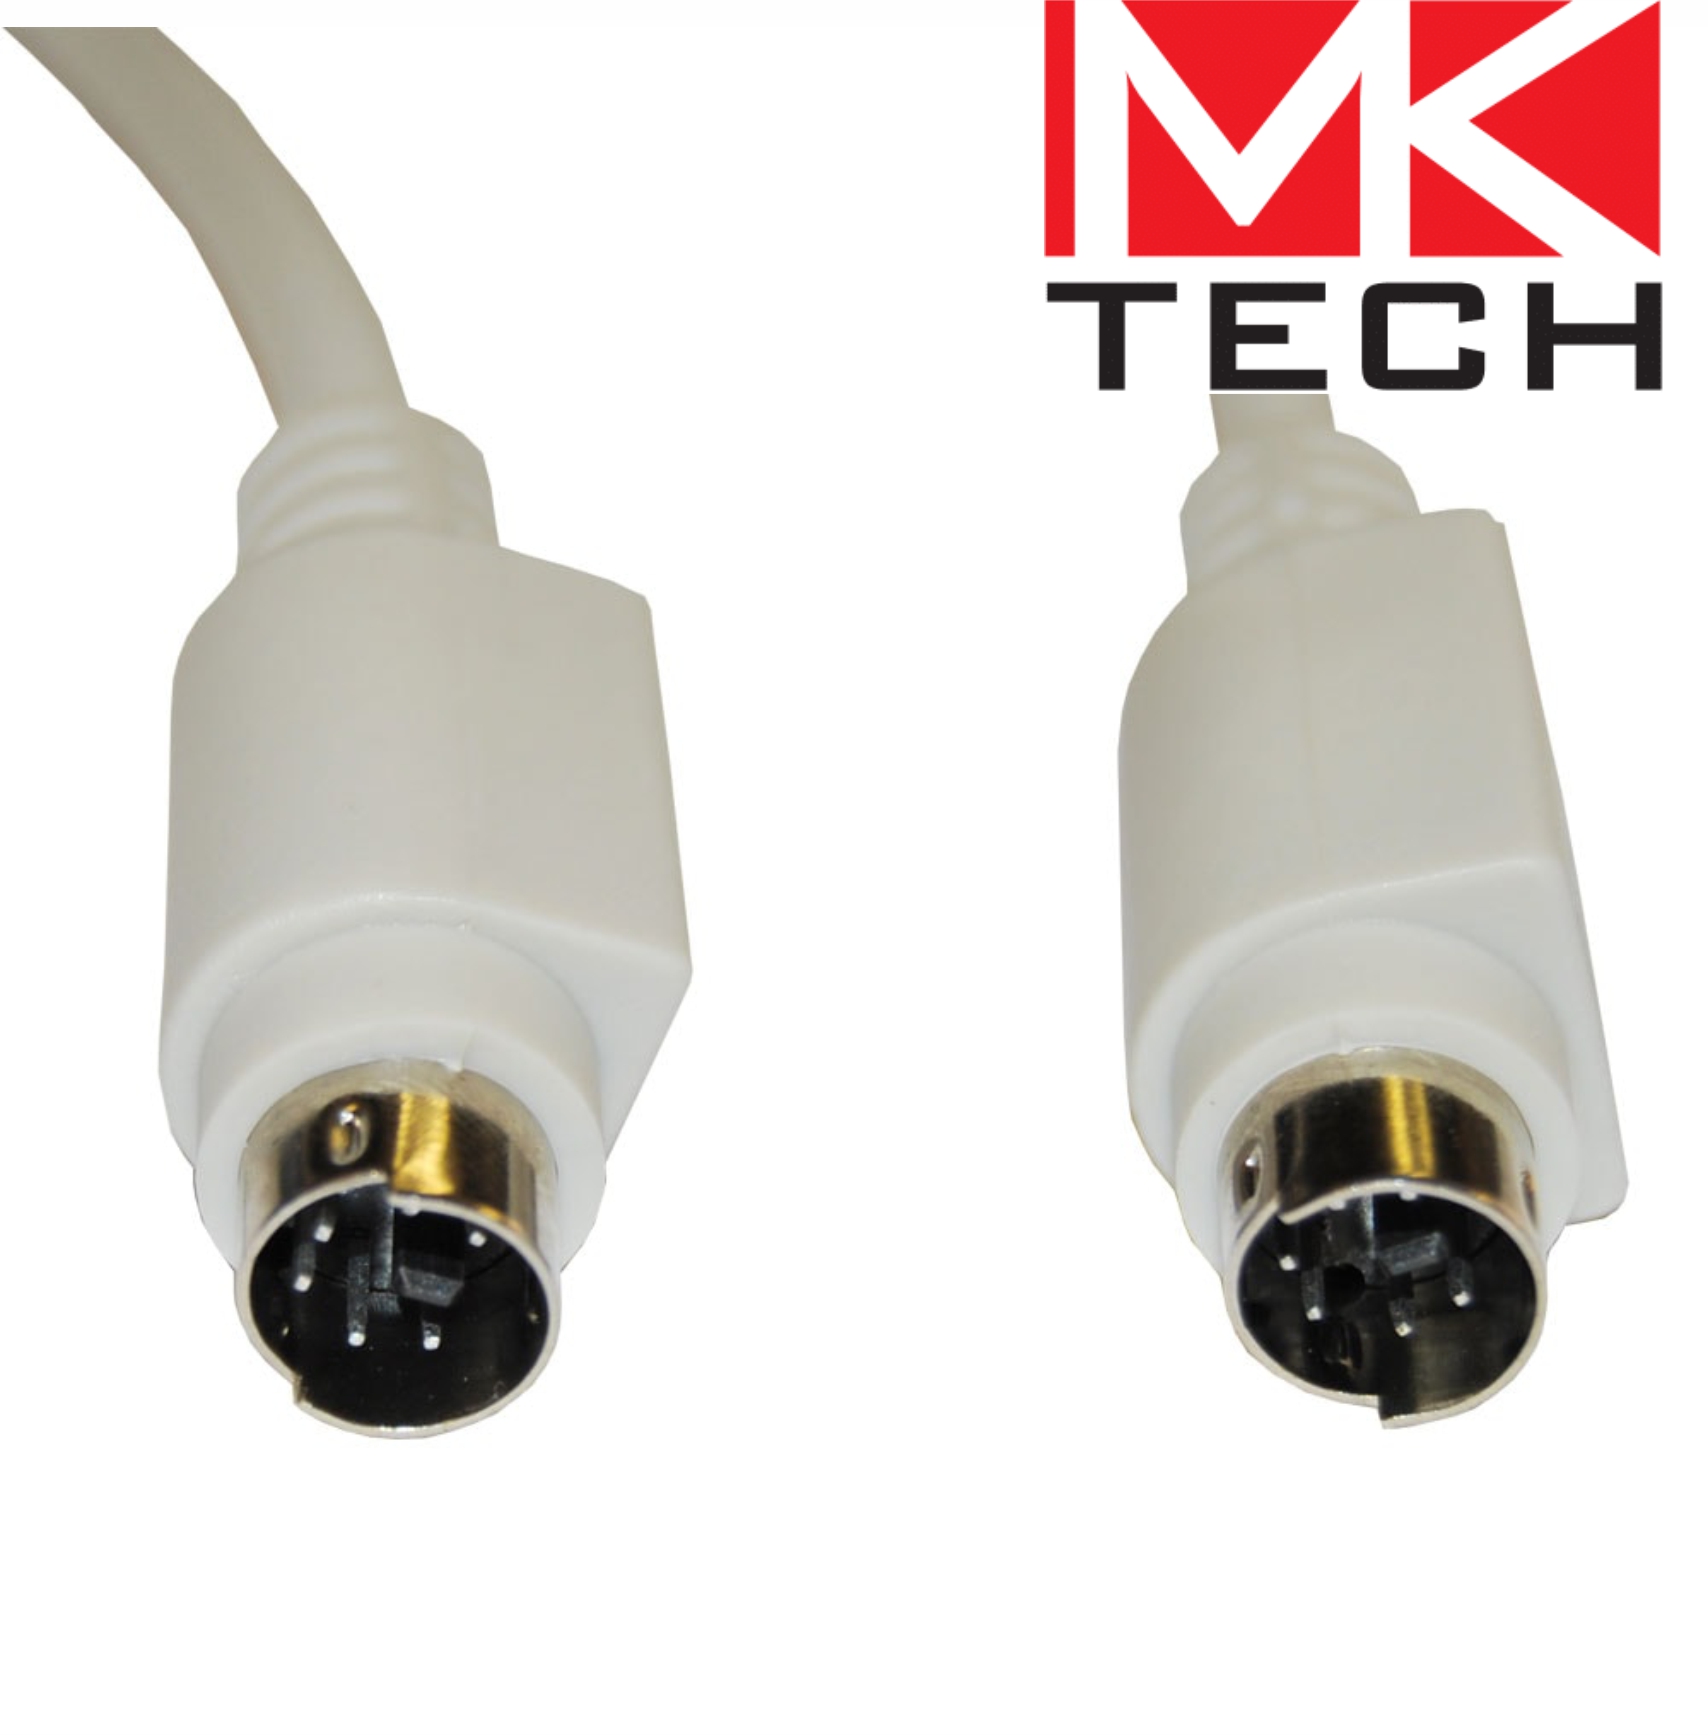 Keyboard cable PS2 M/M, 2m MKTECH